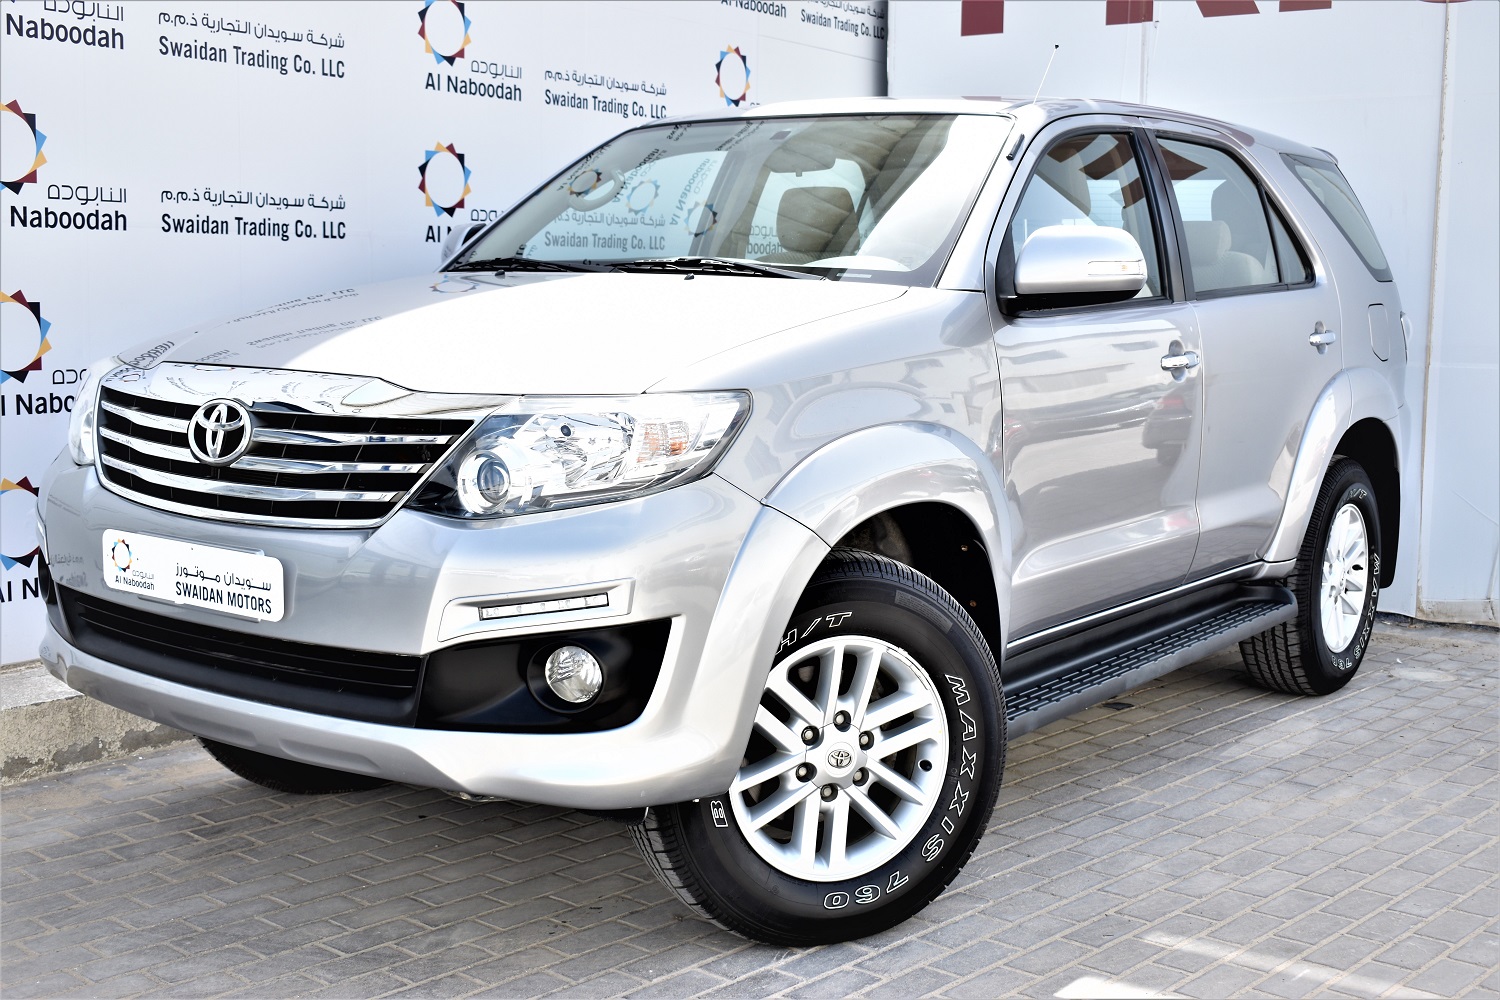 Toyota Fortuner For sale in UAE - Toyota Fortuner Price in UAE